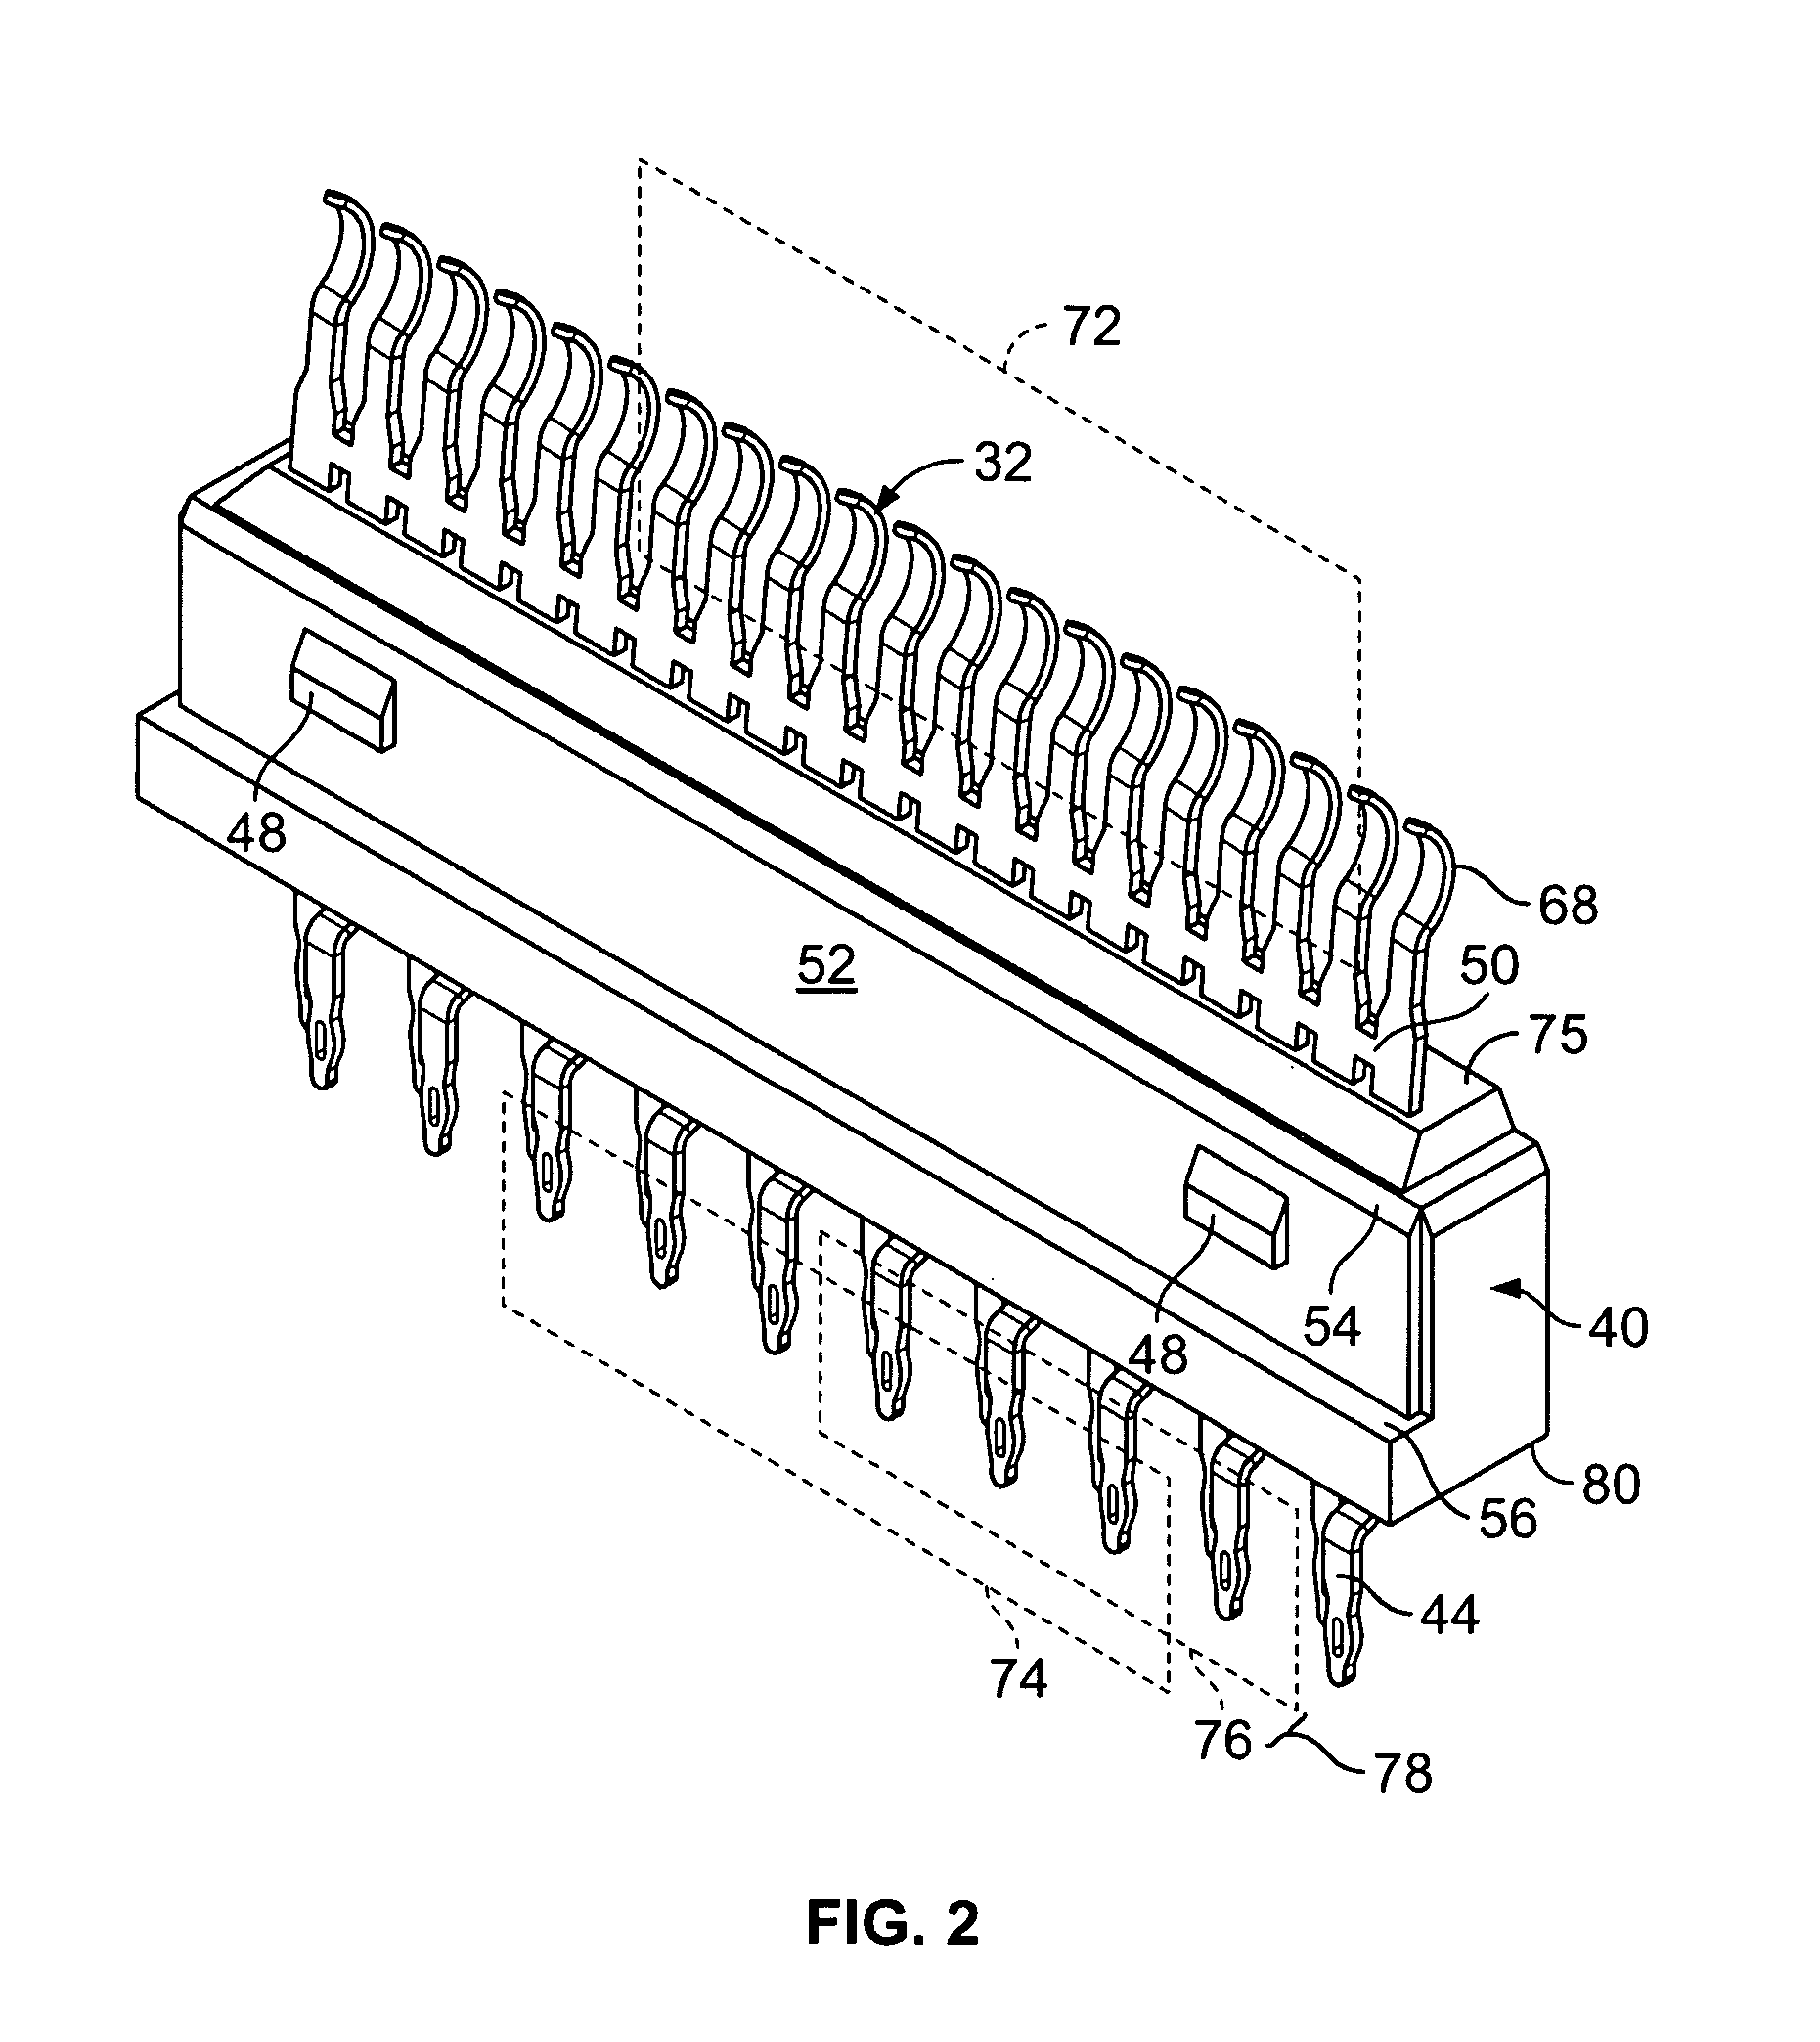 Modular high speed connector assembly